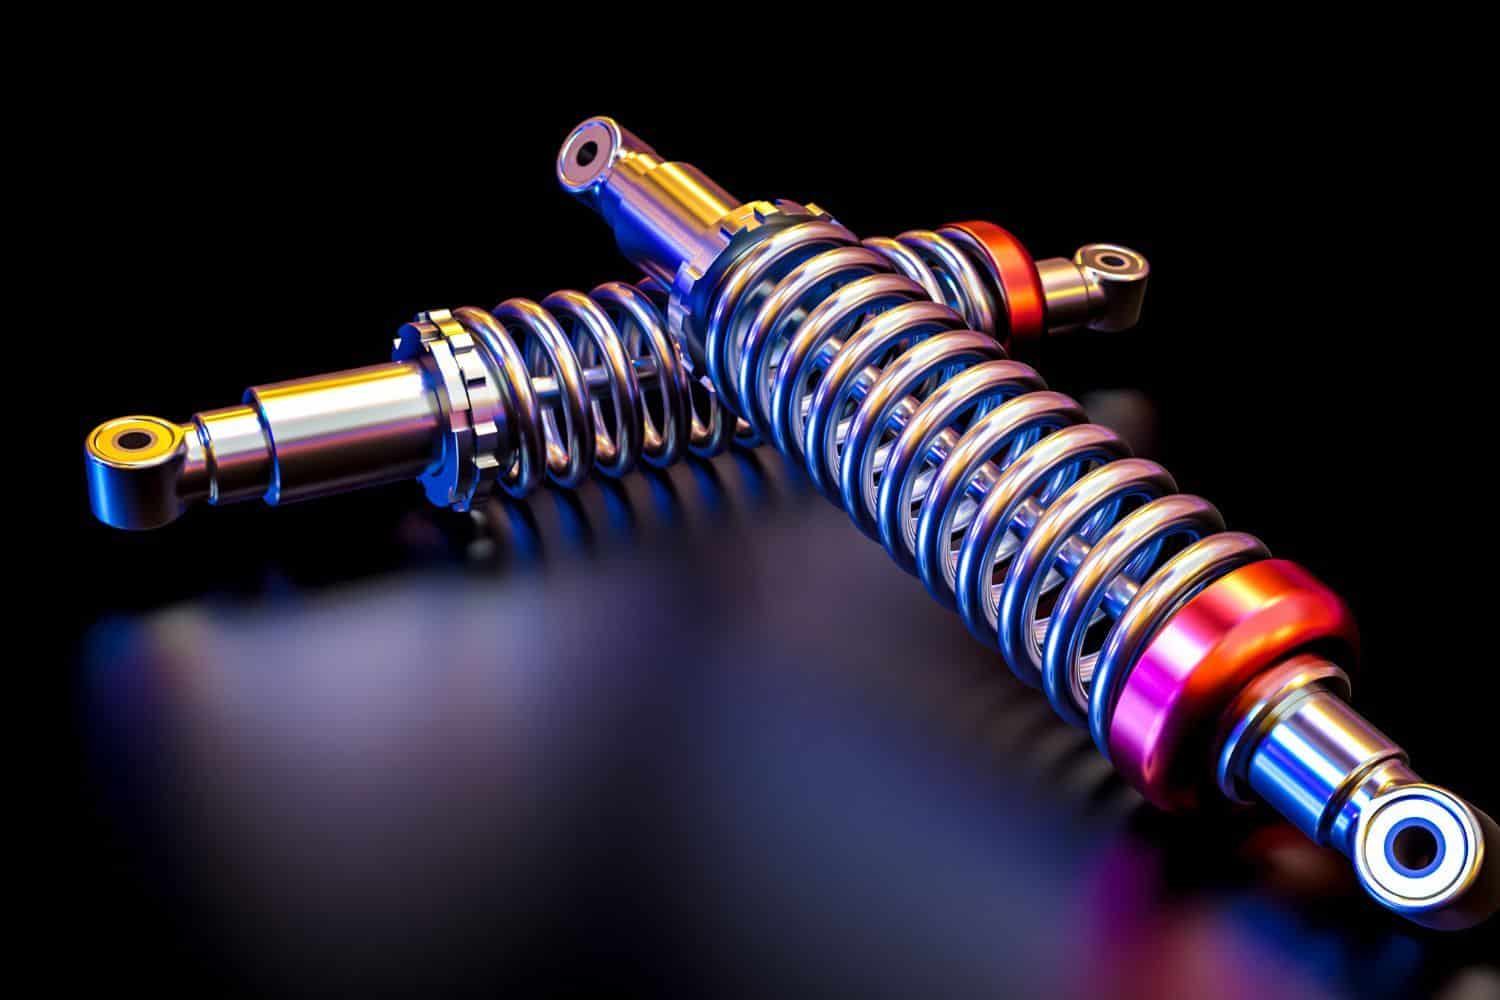 What Are Shock Absorbers?